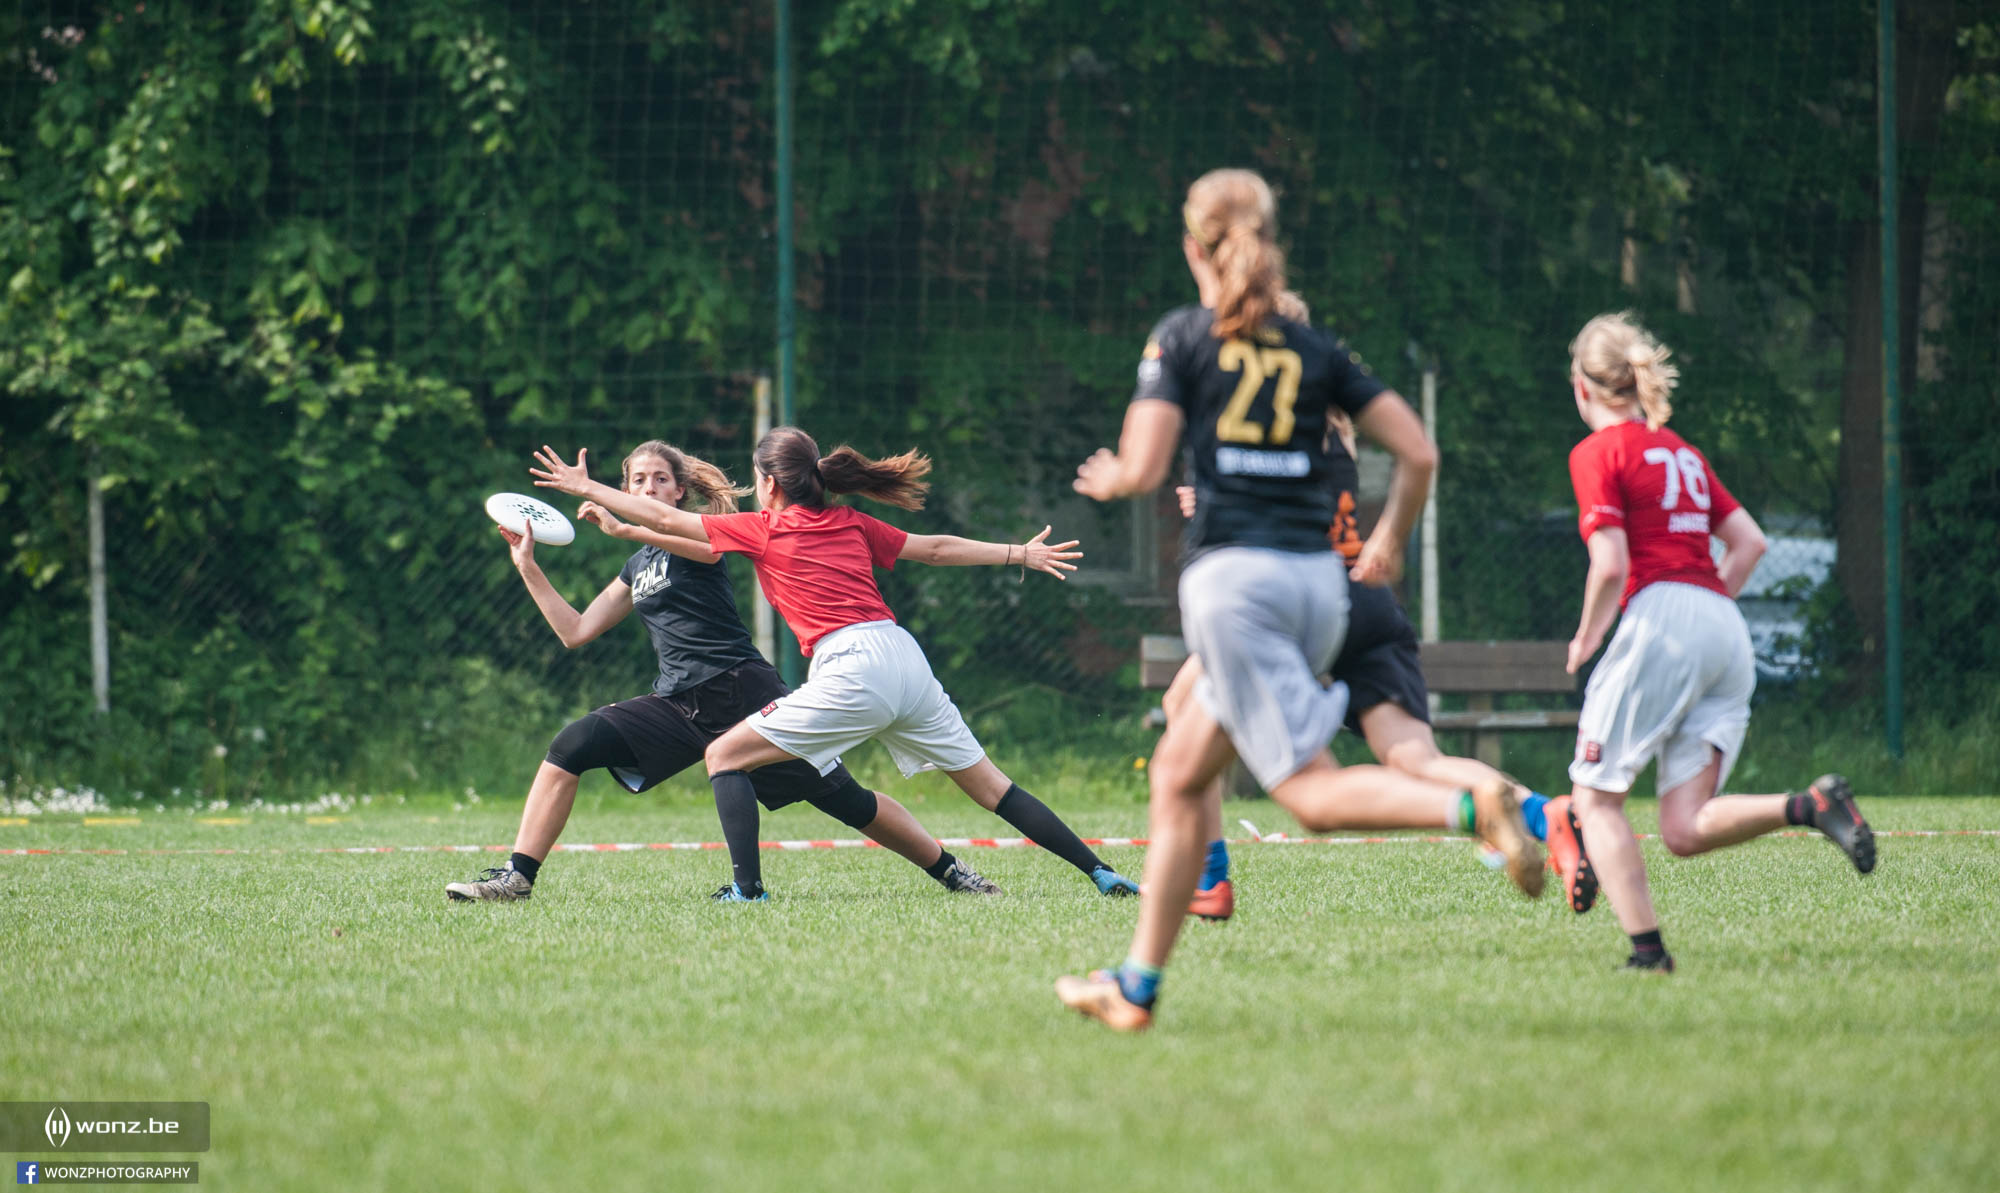 Belgian Ultimate Outdoor Championships (Open and Woman) by wonz.be